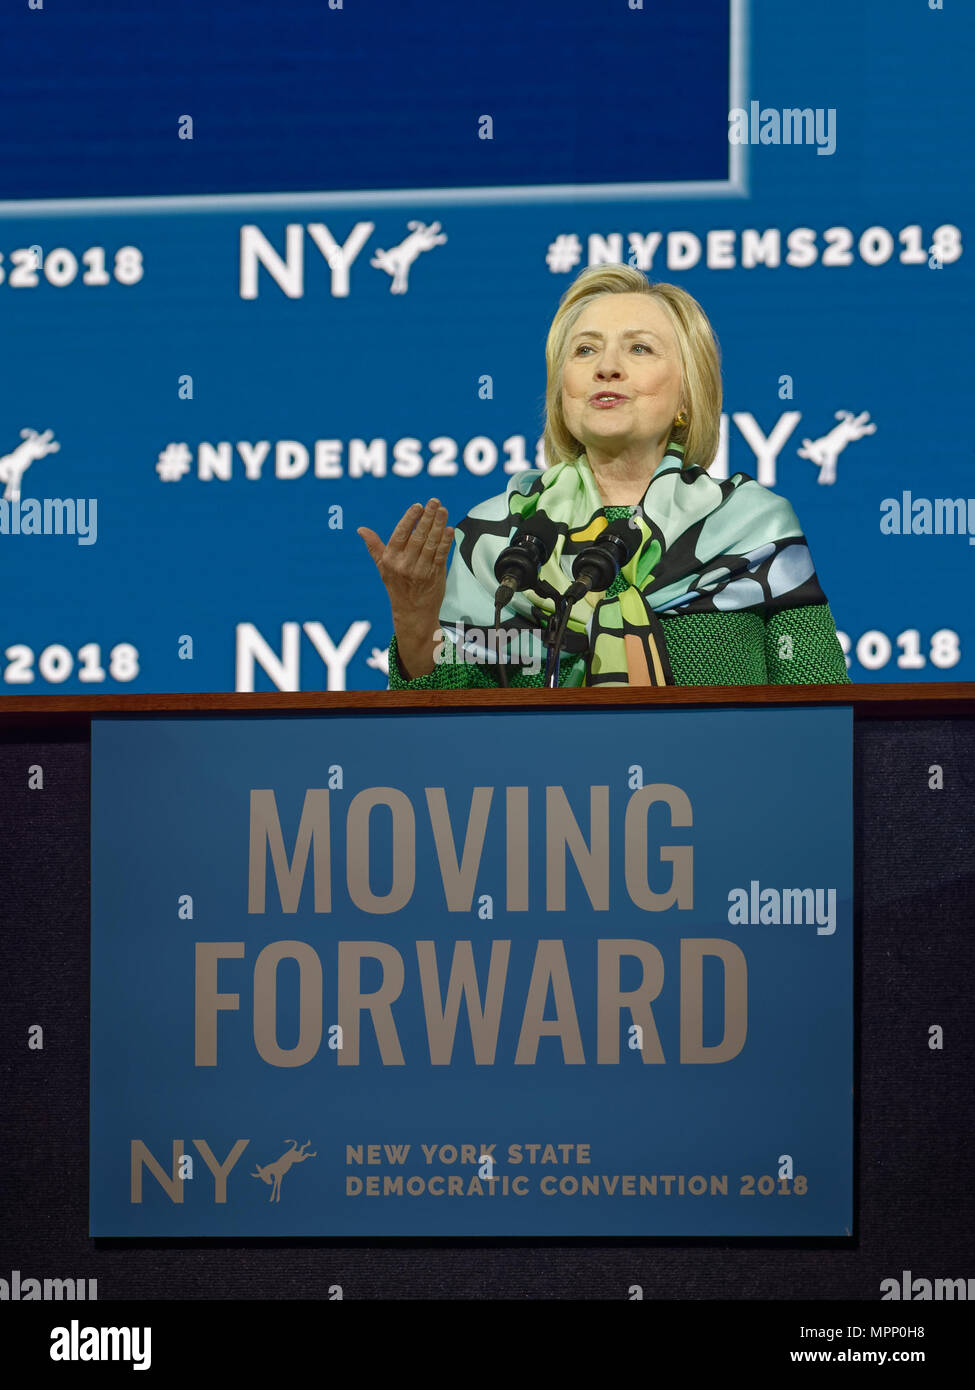 Long Island, USA. 23rd May, 2018. HILLARY CLINTON delivers Keynote Address during Day 1 of New York State Democratic Convention, held at Hofstra University on Long Island. Clinton, the former First Lady and NYS Senator, endorsed the re-election of Gov. A. Cuomo for a third term, and mentioned how Hofstra was the site of her first 2016 debate with Trump. Credit: Ann E Parry/Alamy Live News Stock Photo